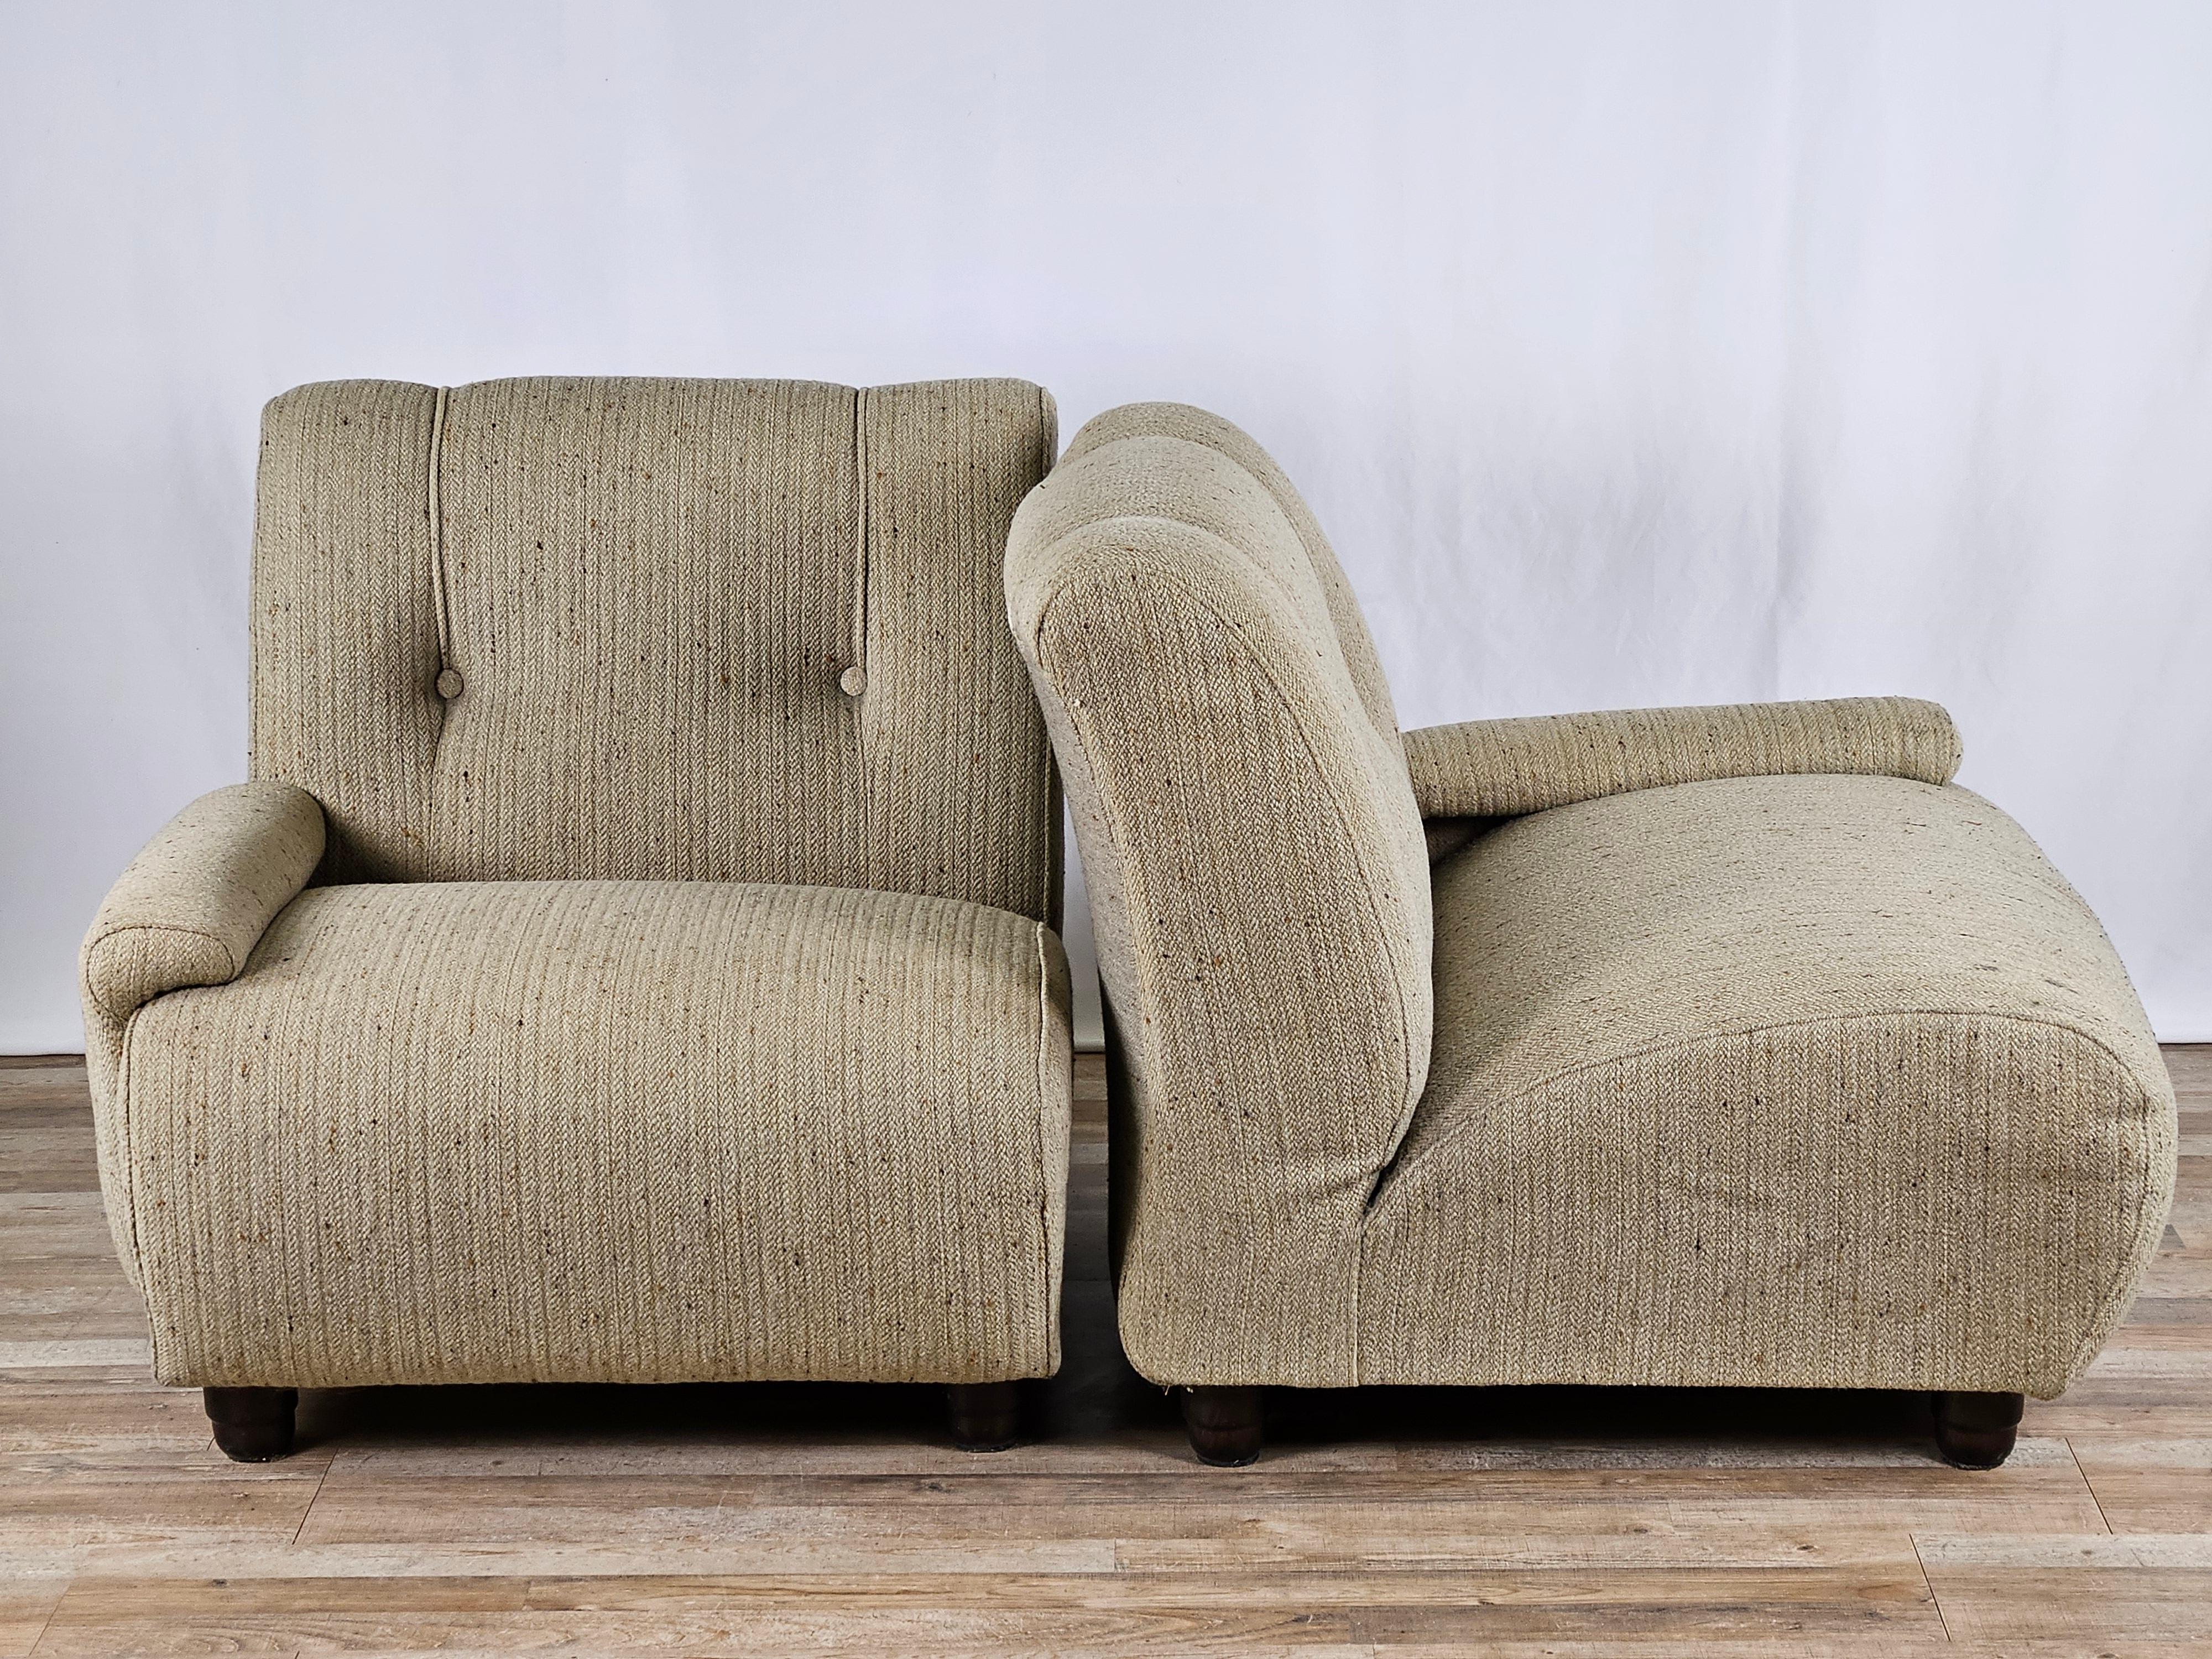 Modular corner sofa four seats in 1970s fabric In Good Condition For Sale In Premariacco, IT